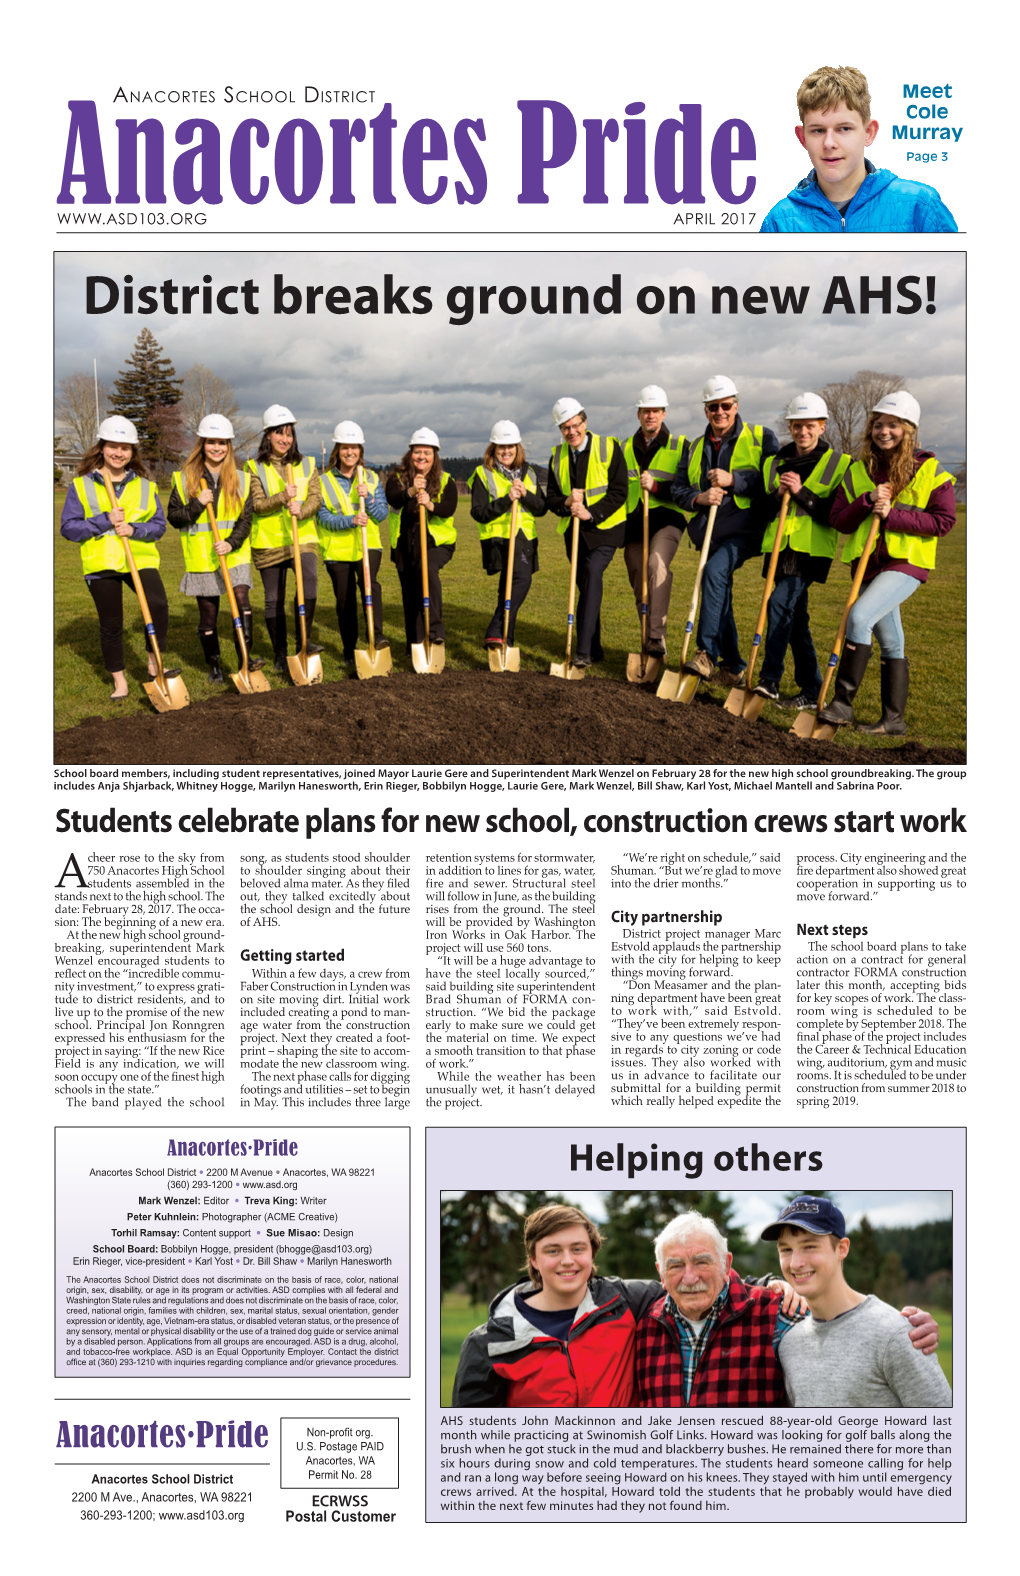 District Breaks Ground on New AHS!